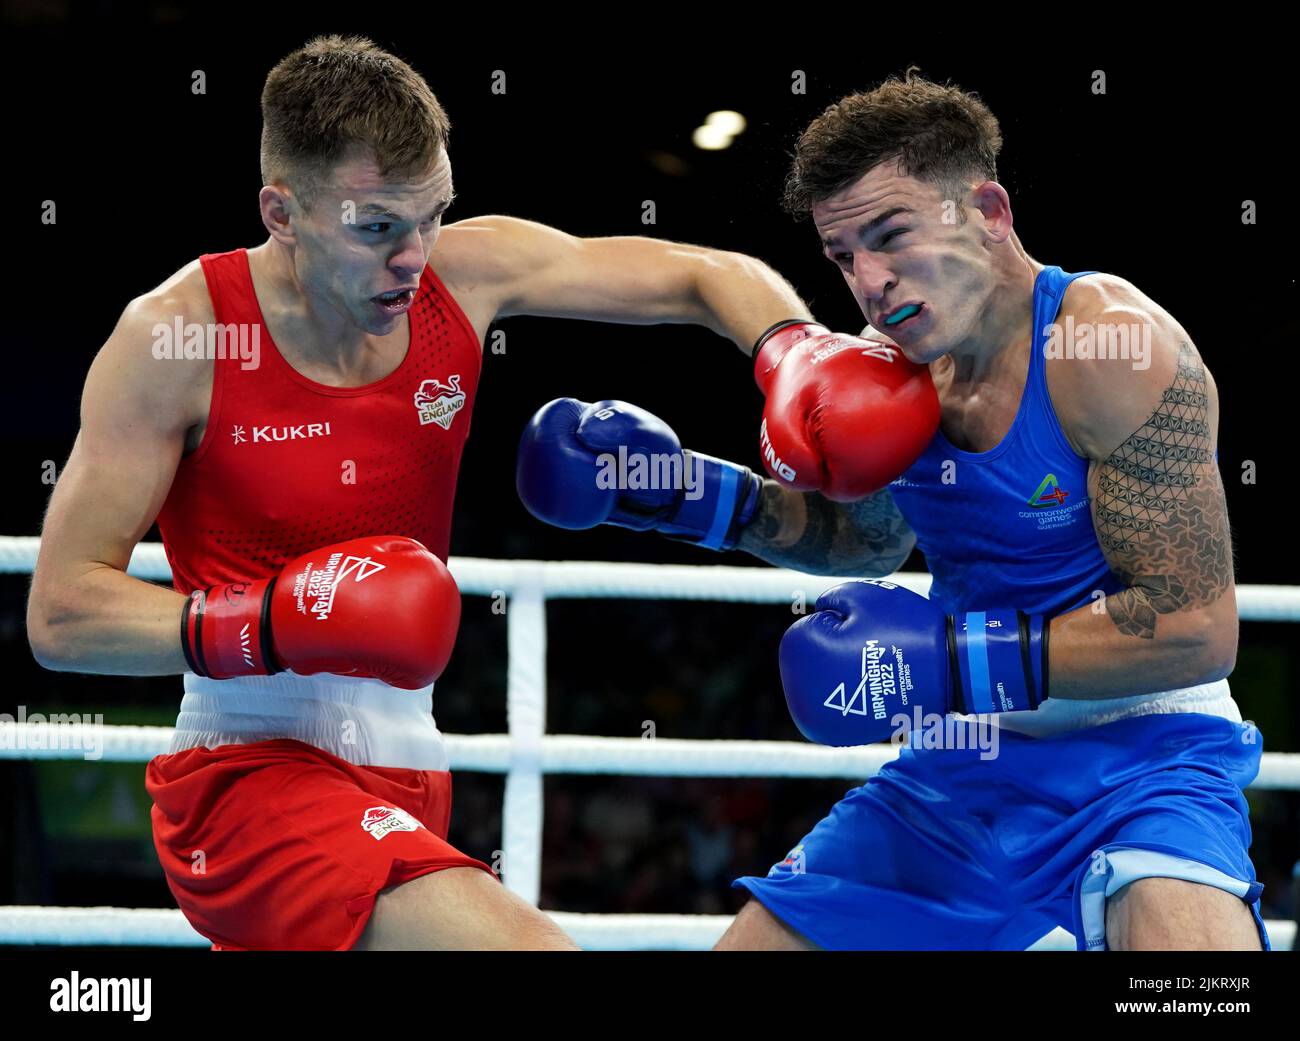 England's Lewis Richardson (left) and Guernsey's Billy le Poullain during the Men's Over 71kg-75kg (Middleweight) - Quarter-Final 1 at The NEC on day six of the 2022 Commonwealth Games in Birmingham. Picture date: Wednesday August 3, 2022. Stock Photo